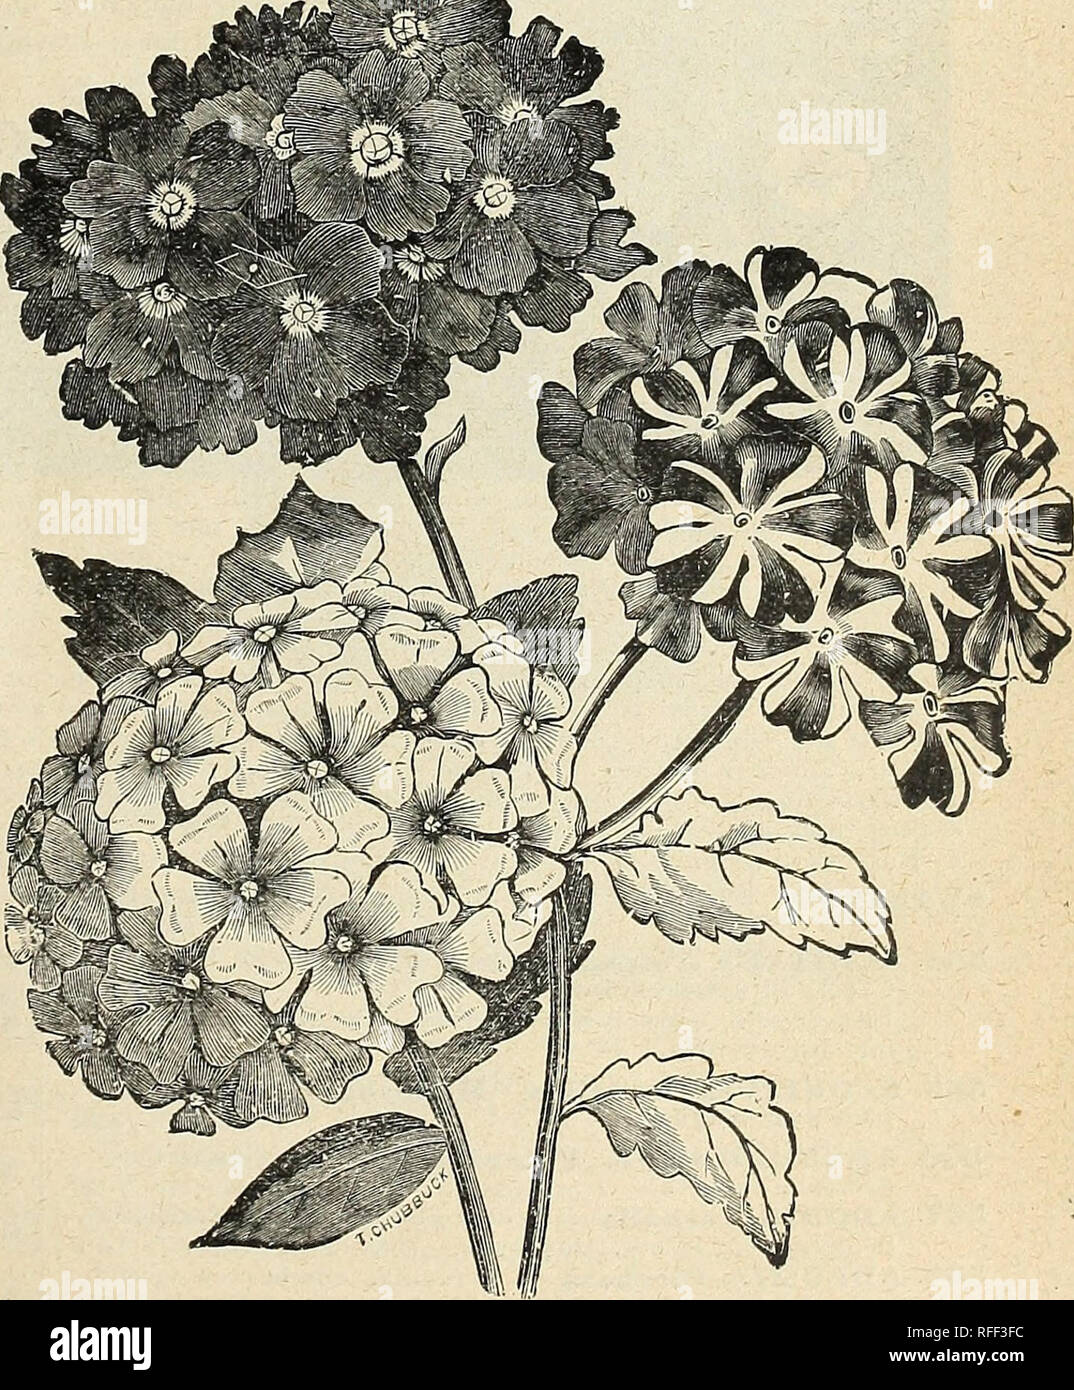 . Wm. Ewing &amp; Co.'s seed catalogue. Nursery stock Que?bec (Province) Montre?al Catalogs; Vegetables Seeds Catalogs; Grasses Seeds Catalogs; Flowers Seeds Catalogs; Plants, Ornamental Catalogs; Agricultural implements Catalogs. Pkt cts 539- WHiTLAVIA-h. a., 1 foot. Dees well for beds or edgings, and flowers well in the shade 5- 540- WILD CUCUMBER—A rapid growing and hand- some hardy climber 5 541- XEjK ANTHEMUM, Fine Mixed-h. a., 1 foot.. .. 5 Should be planted 1 foot apart. Flowers are large and produced in great abundance. &quot;Everlasting Flower.&quot; 542 ZINNIA Grandiflora Laciniata—N Stock Photo